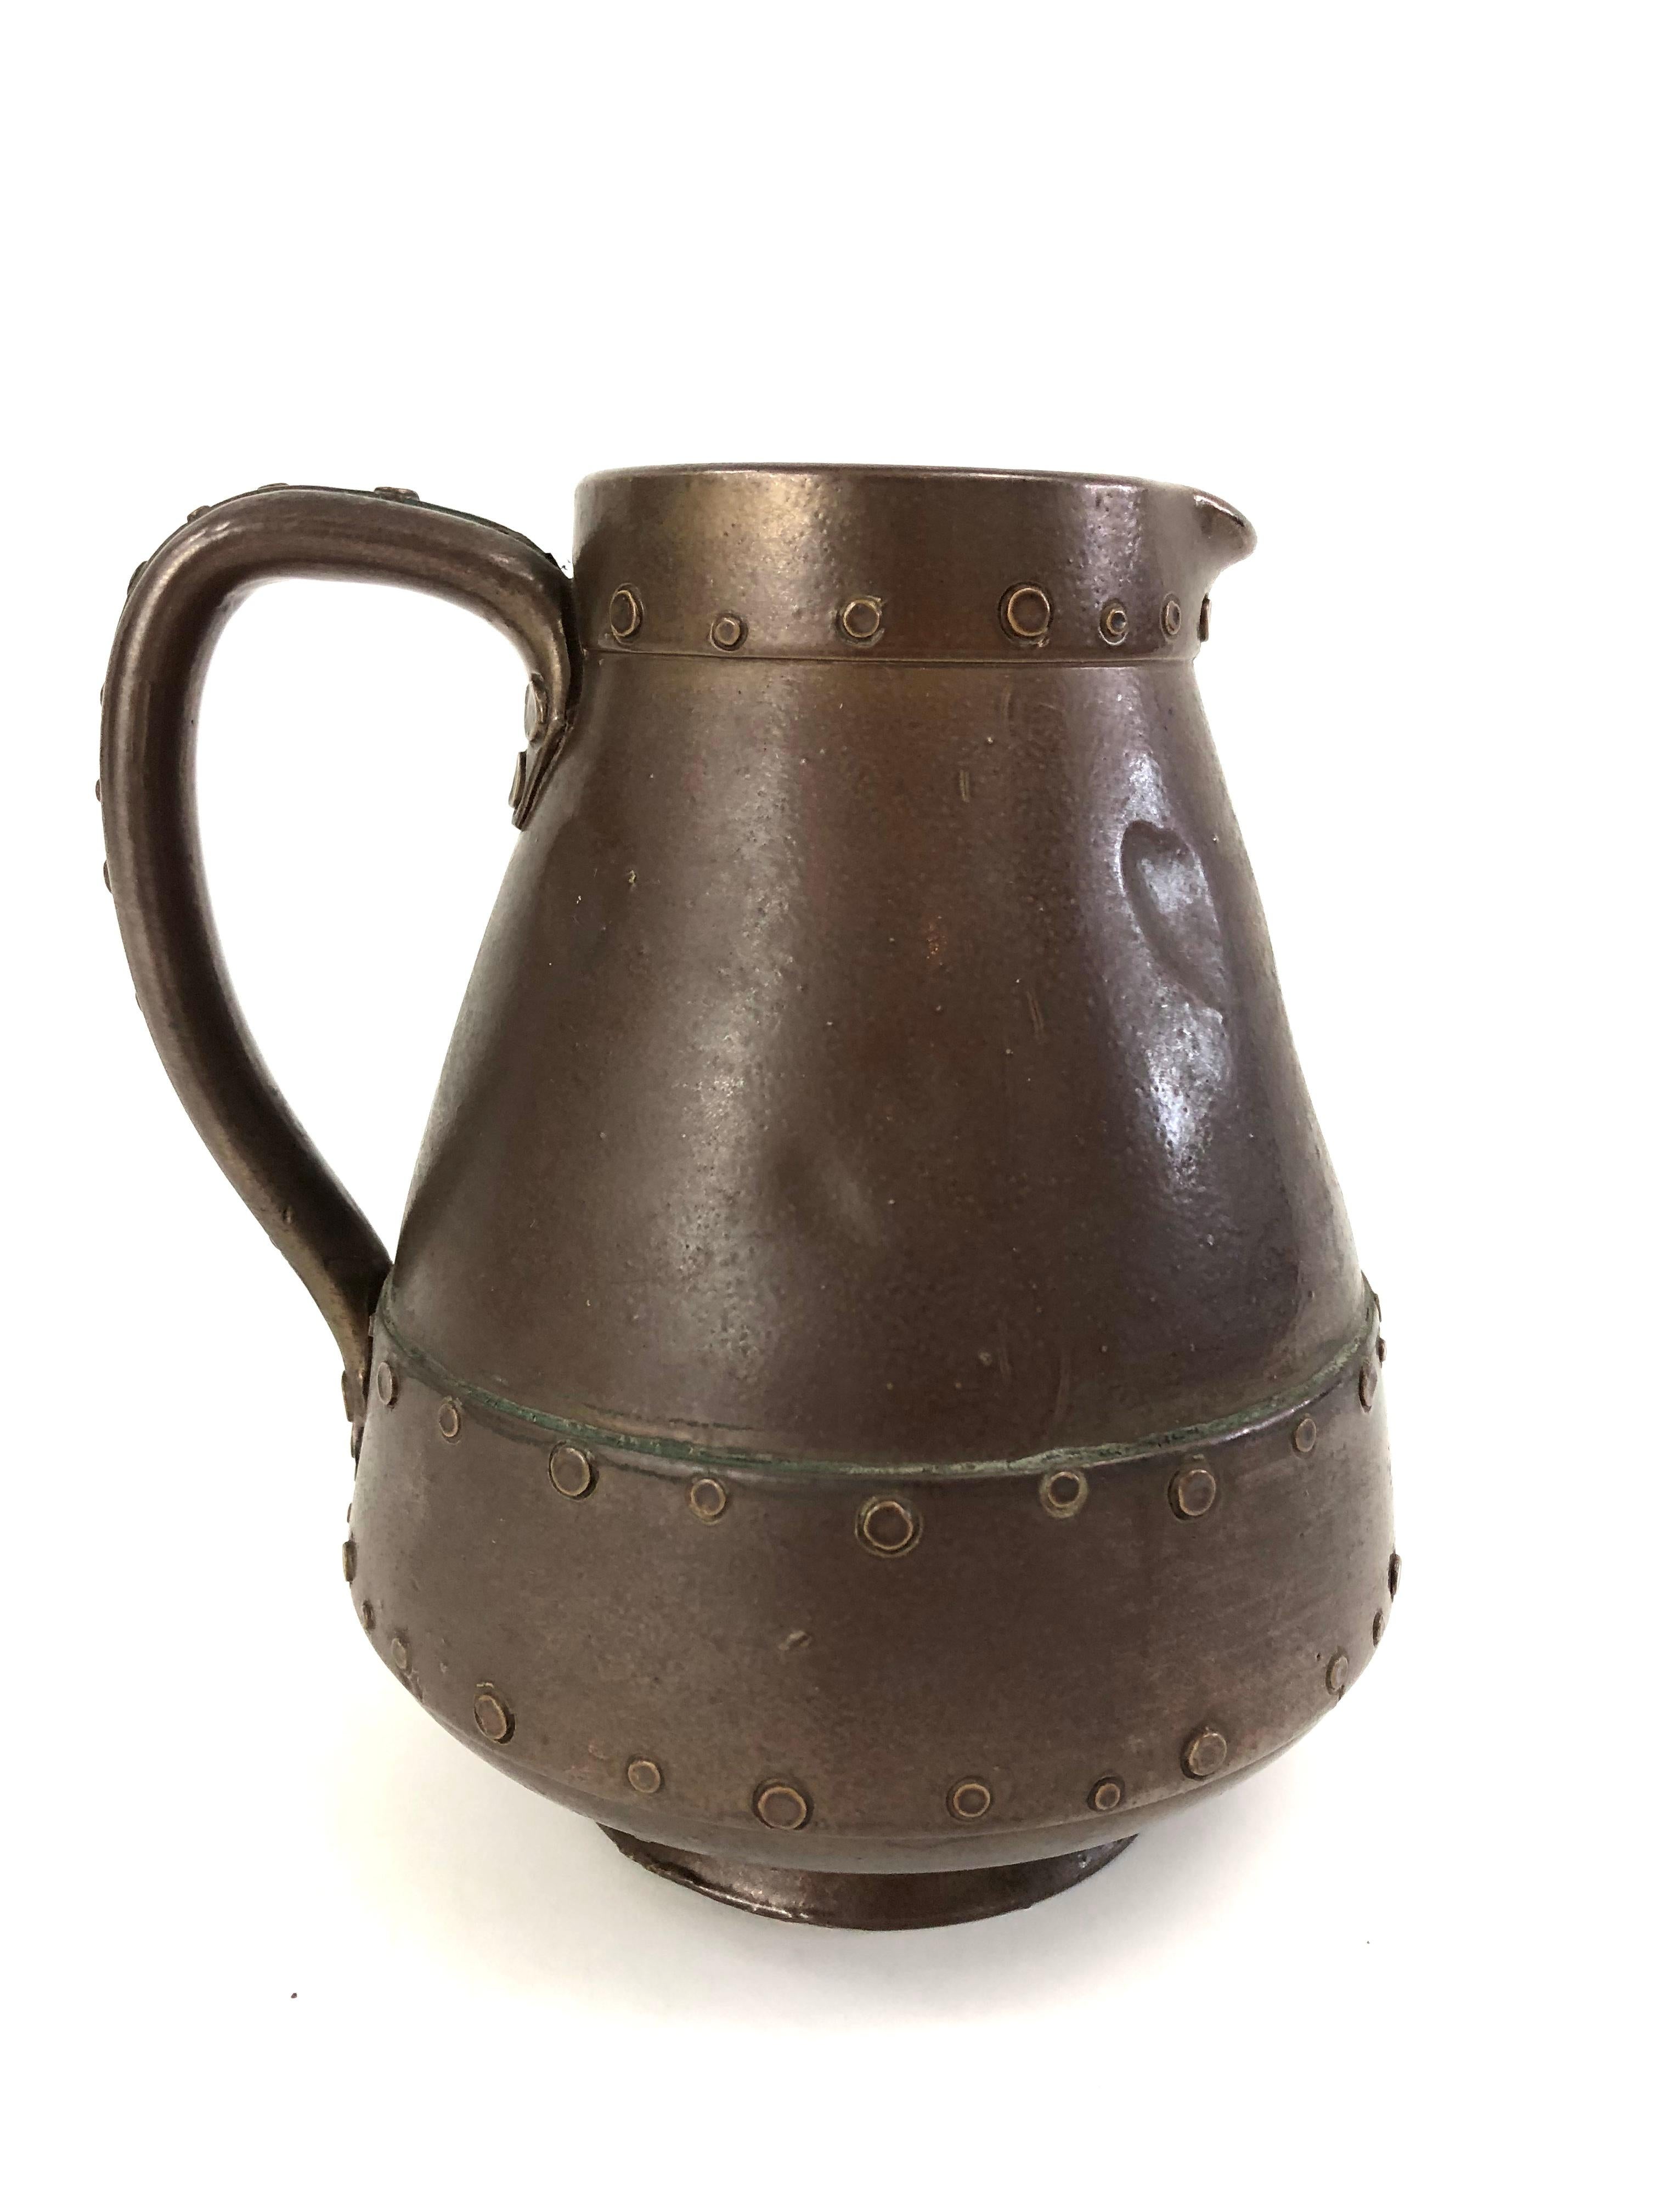 A beautifully and inventively made English Royal Doulton trompe l'oeil pottery pitcher, English, circa 1880, made of glazed ceramic, but designed, in every detail, to resemble a copper pitcher. From its perfectly crafted rivets and the appearance of